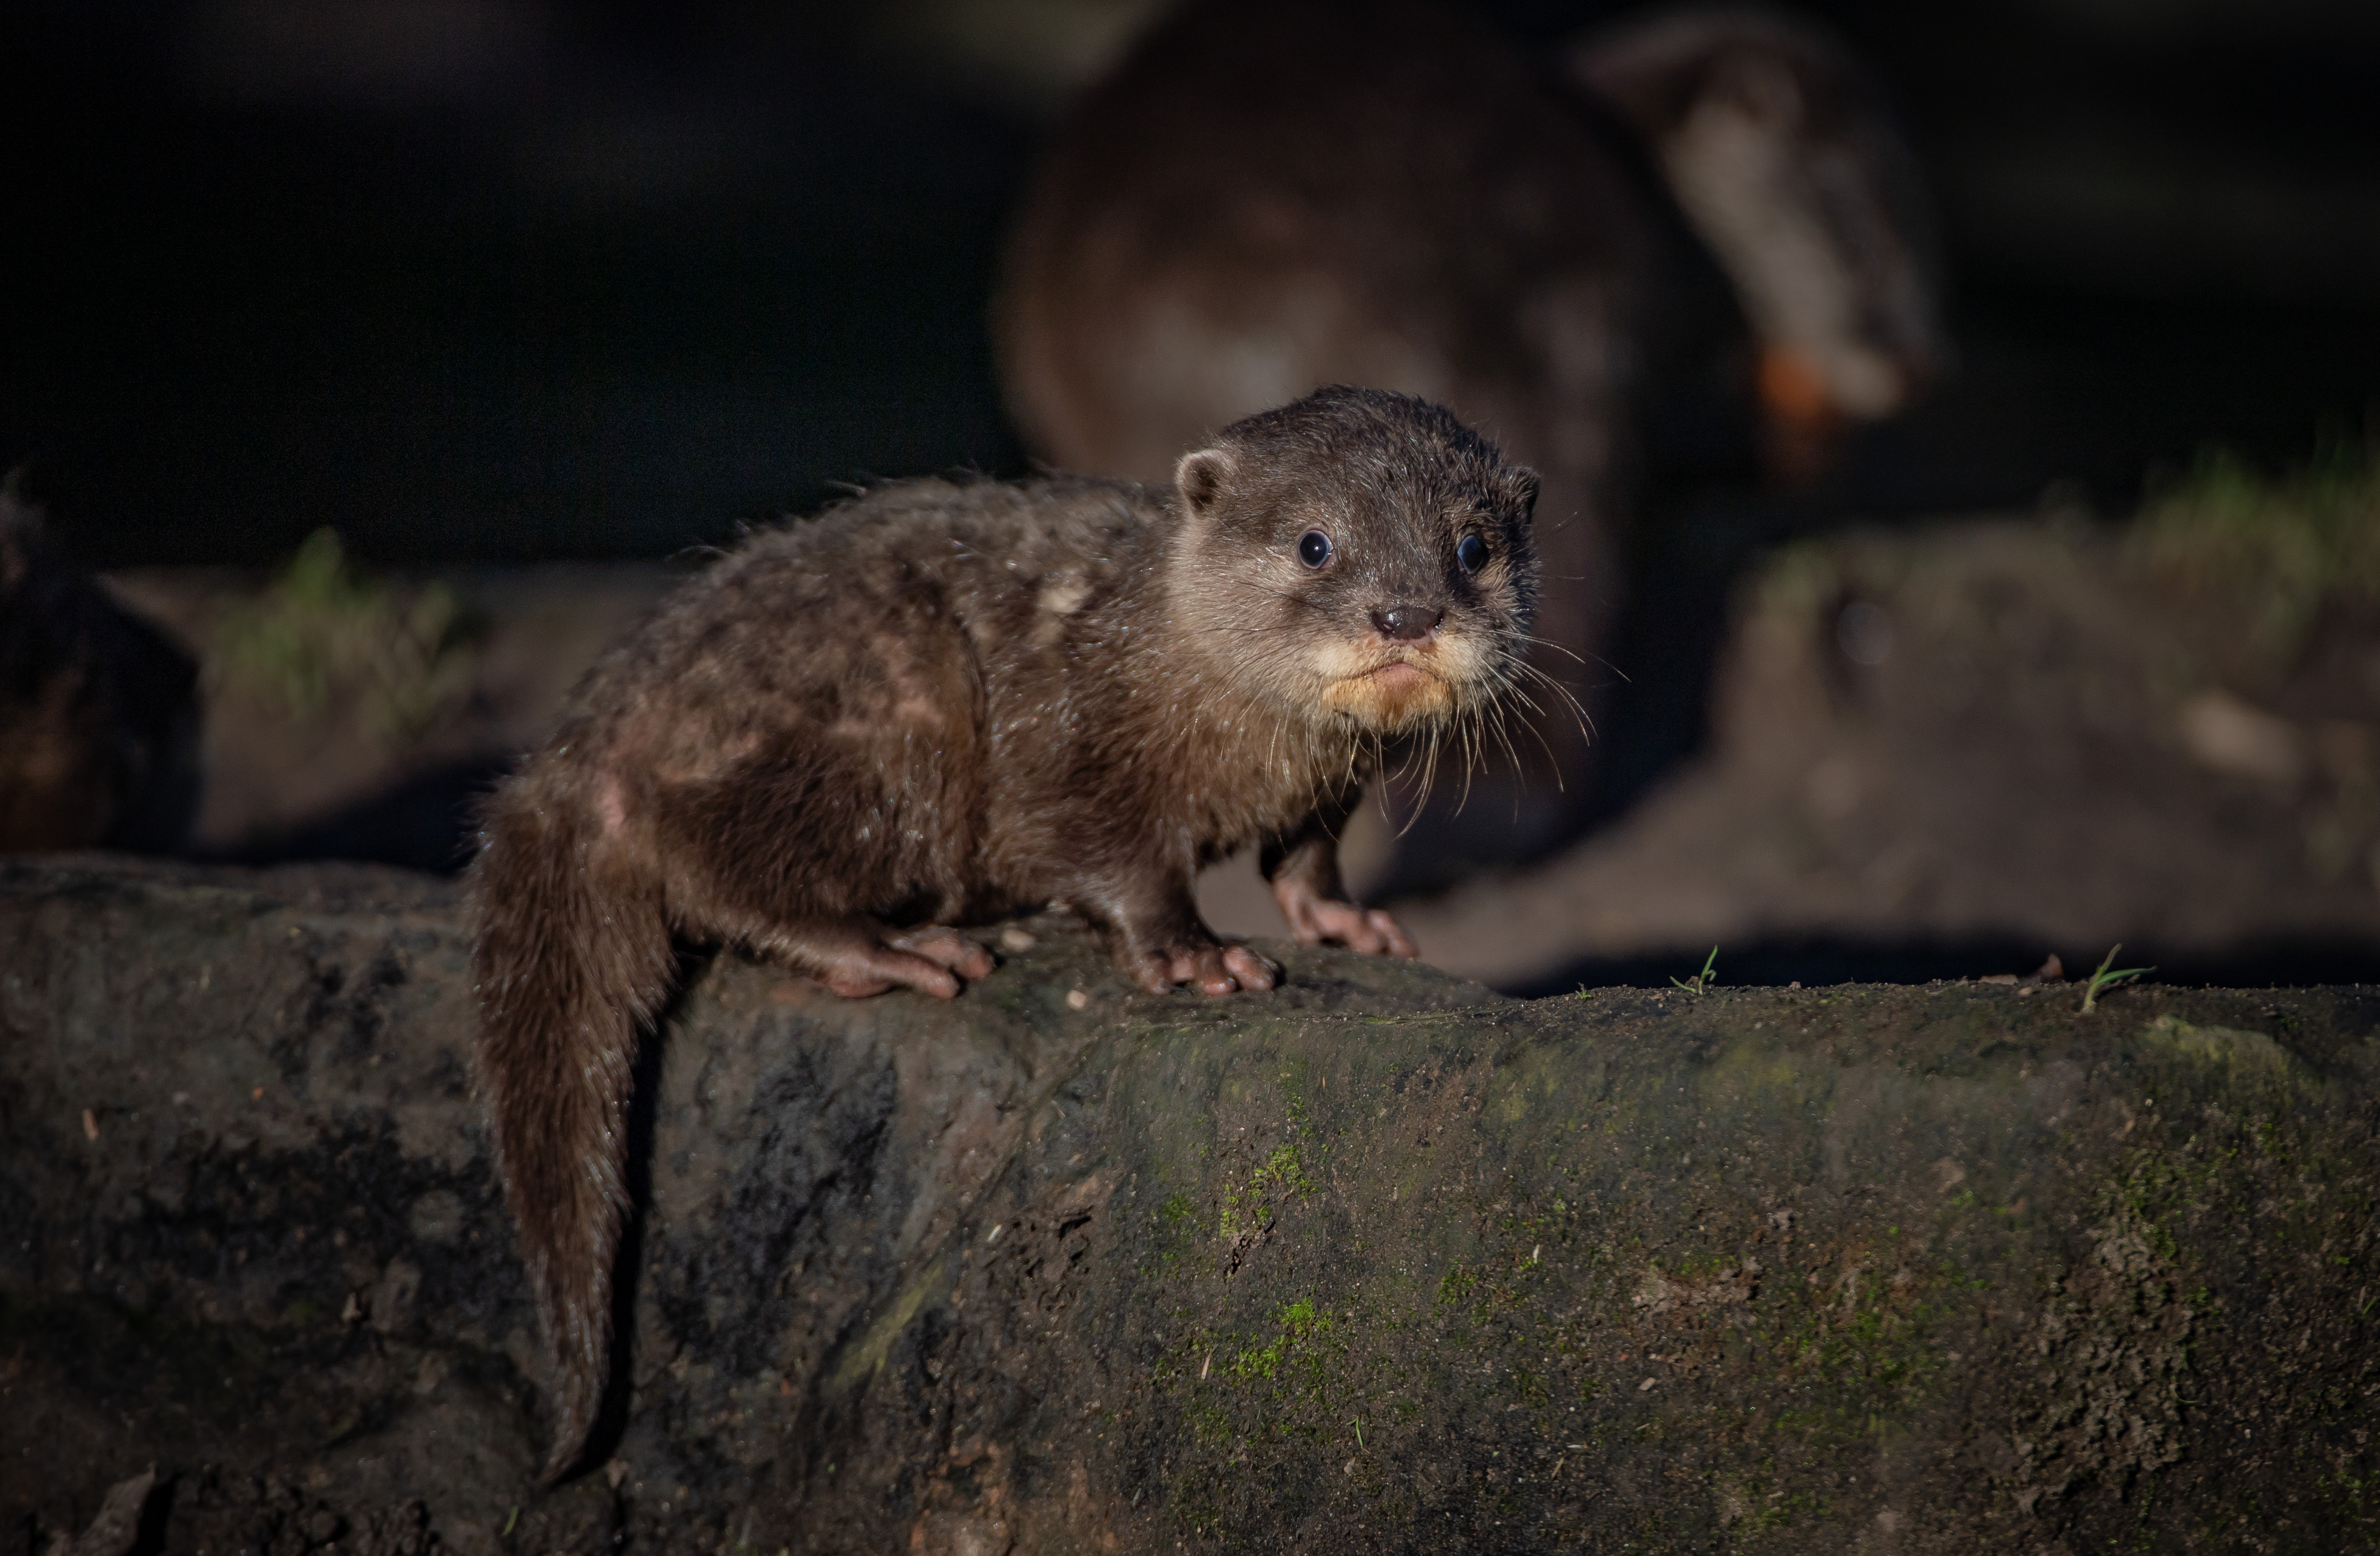 One of the otter pups looking to camera